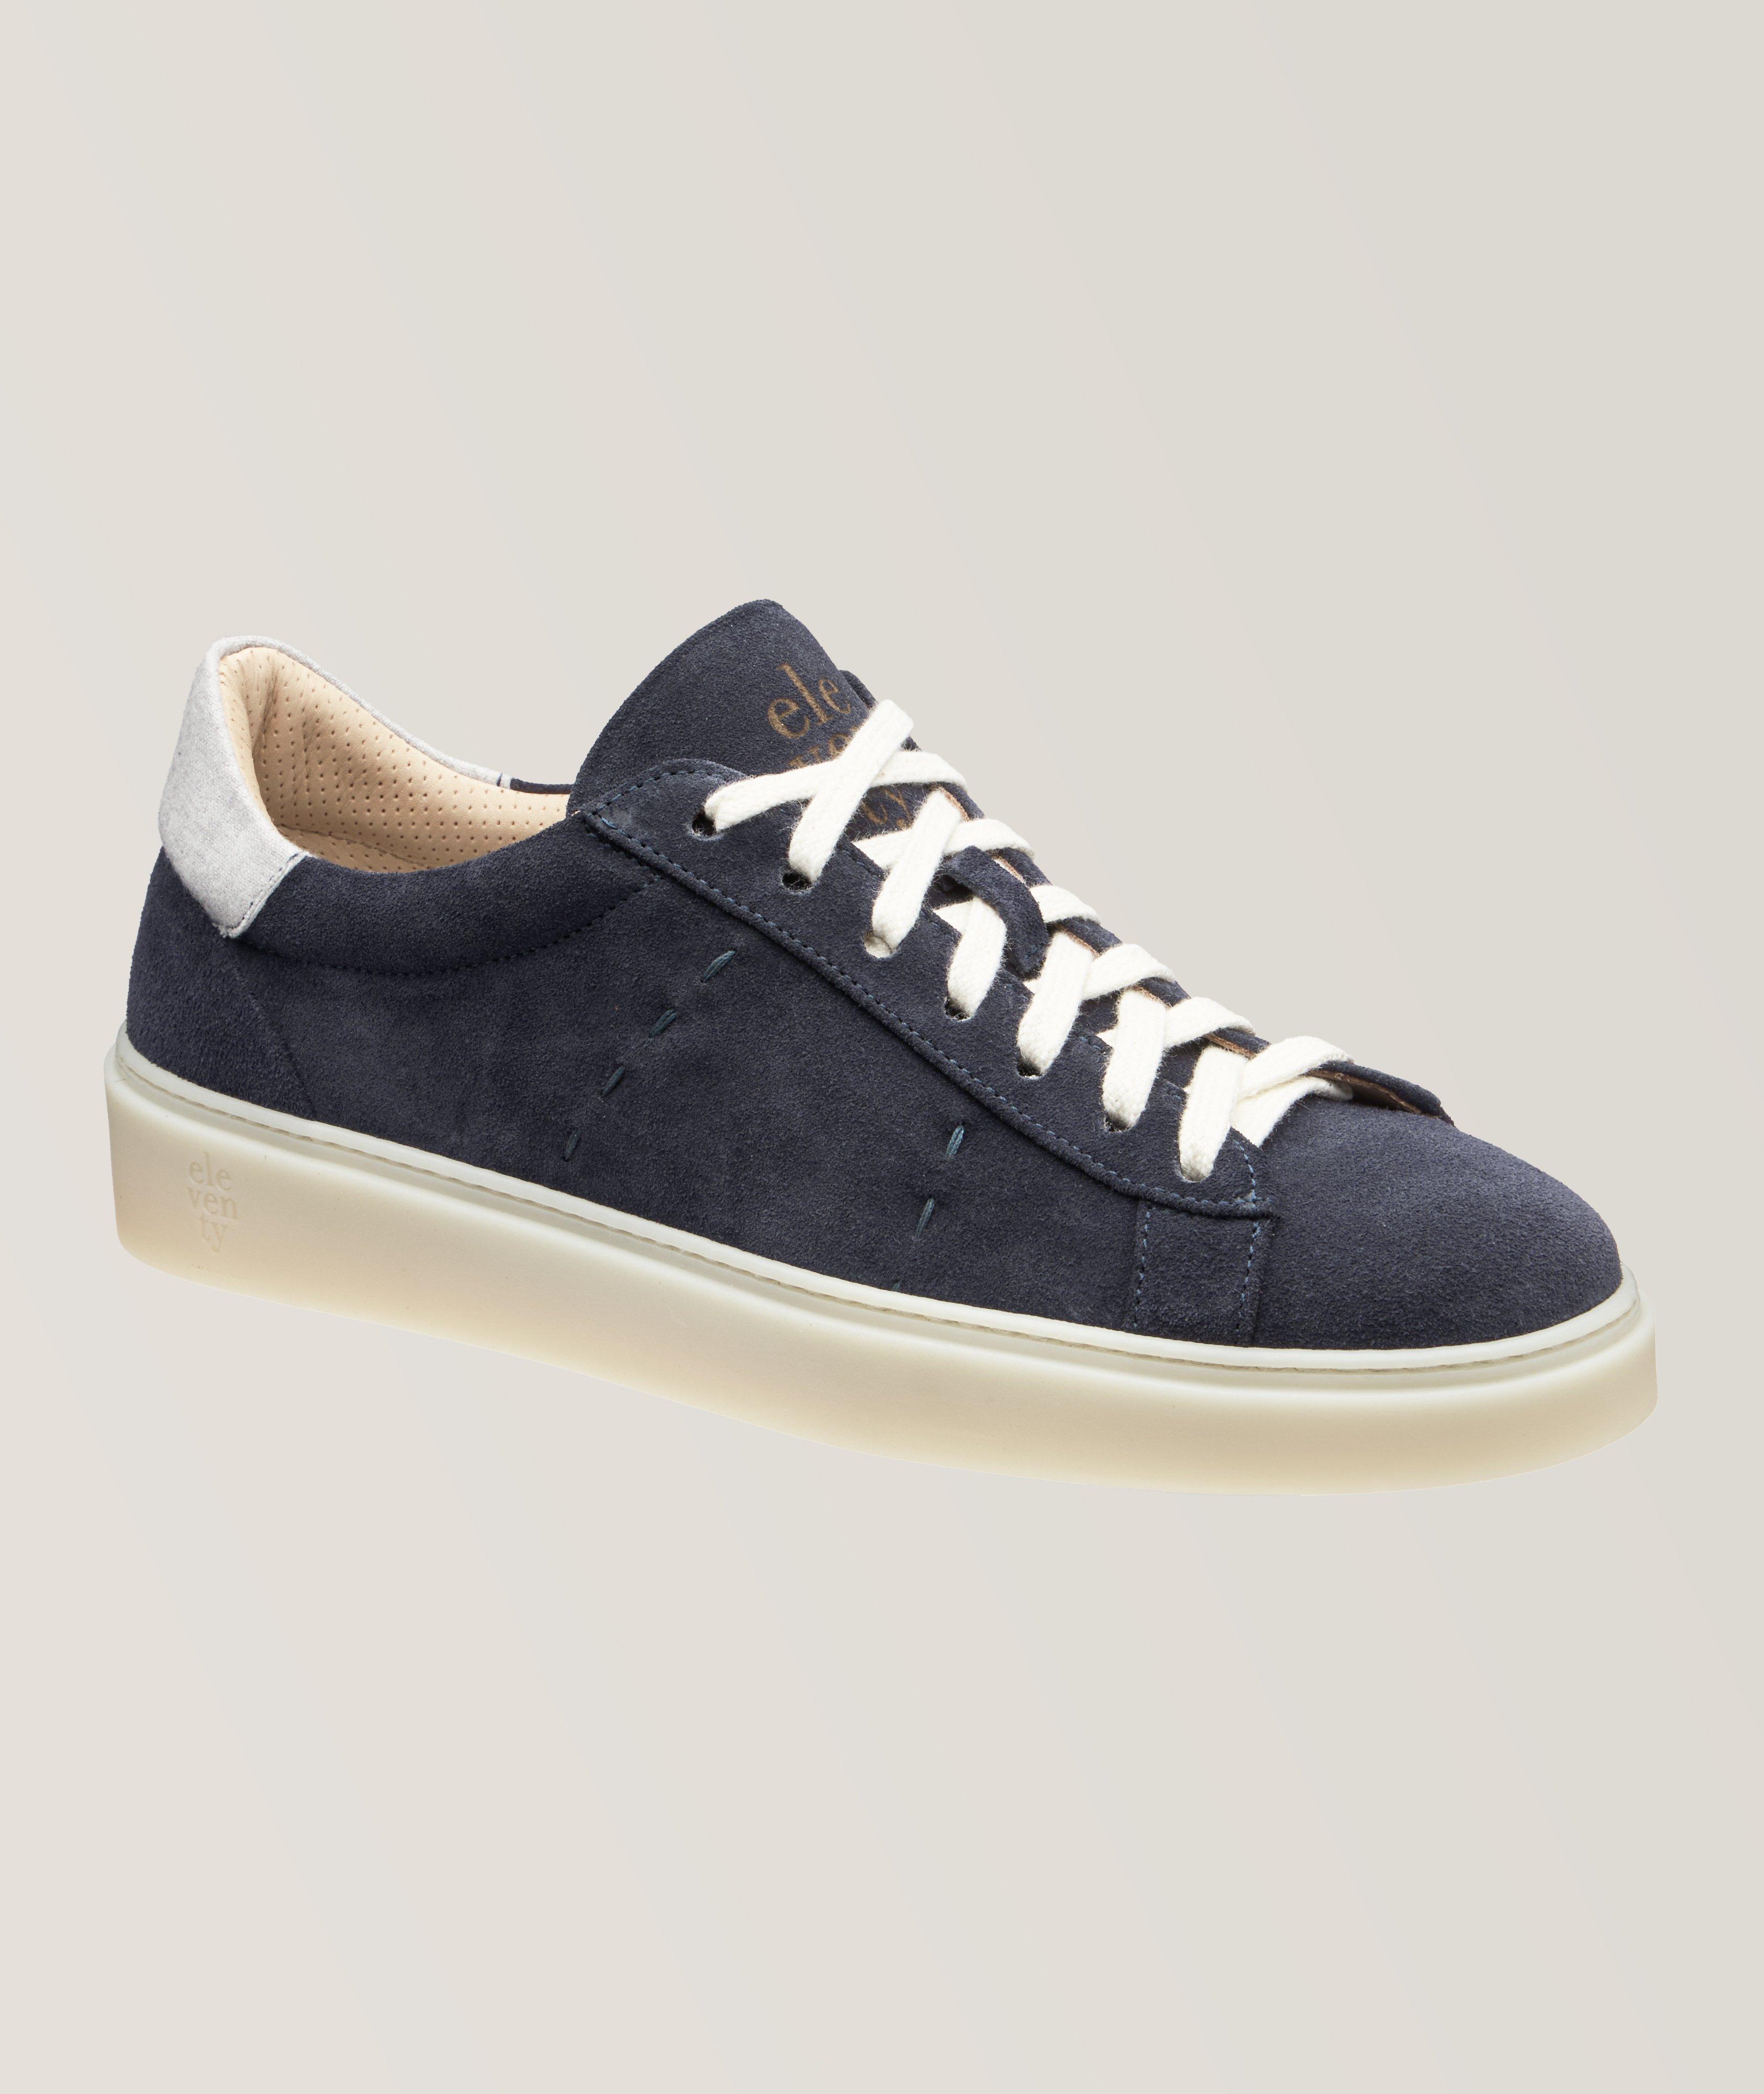 Pick Stitched Leather Sneakers